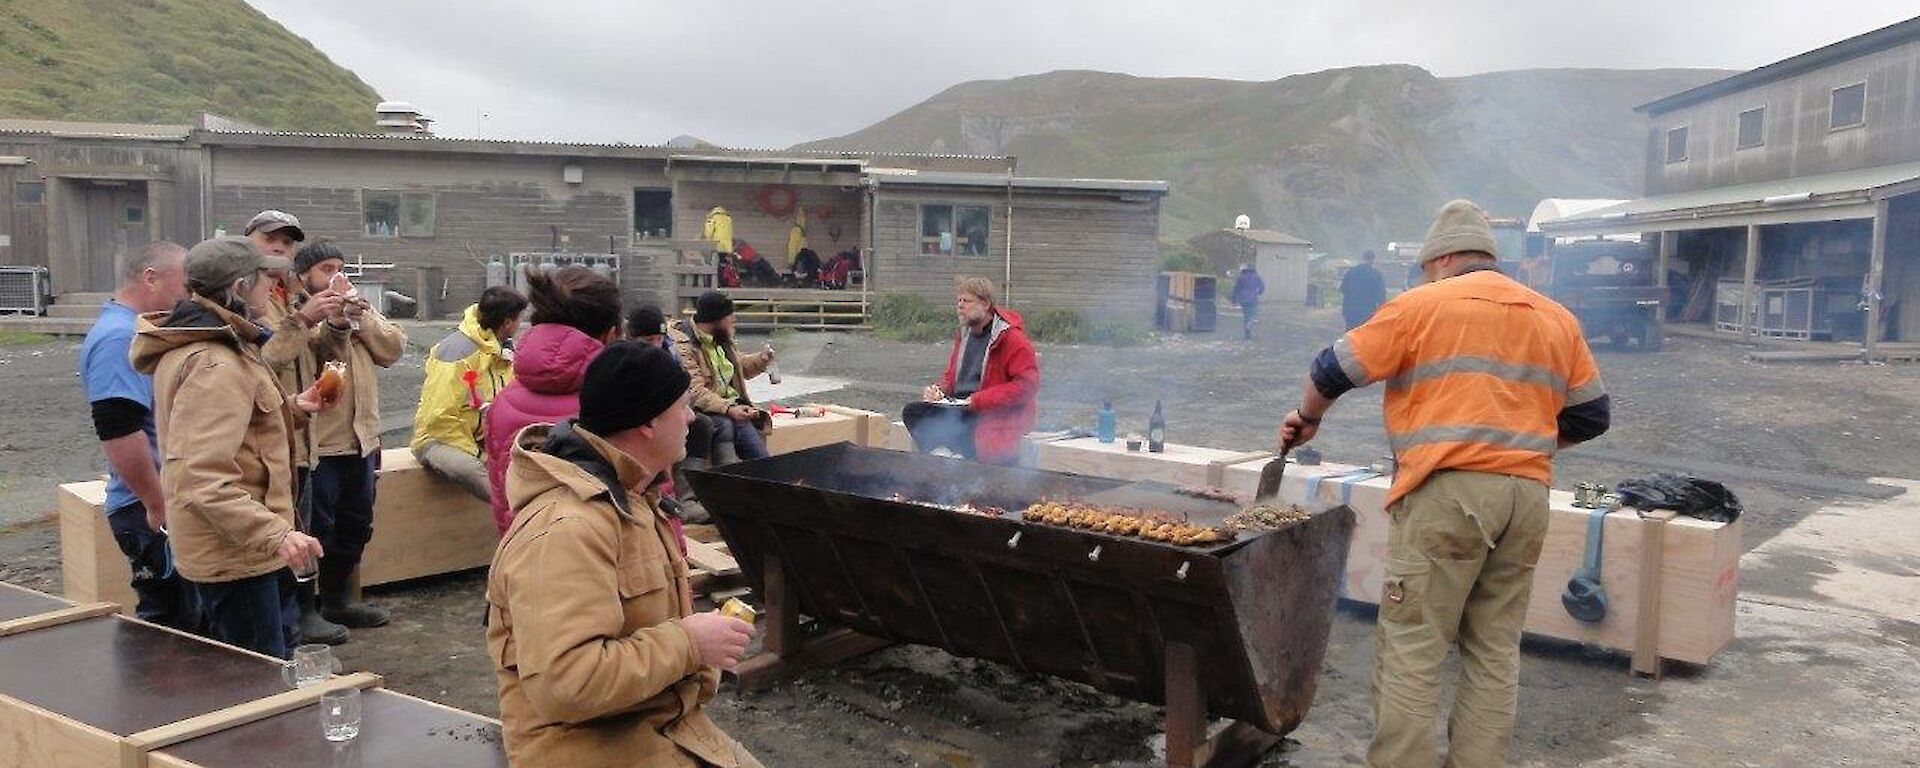 A group of people having a BBQ